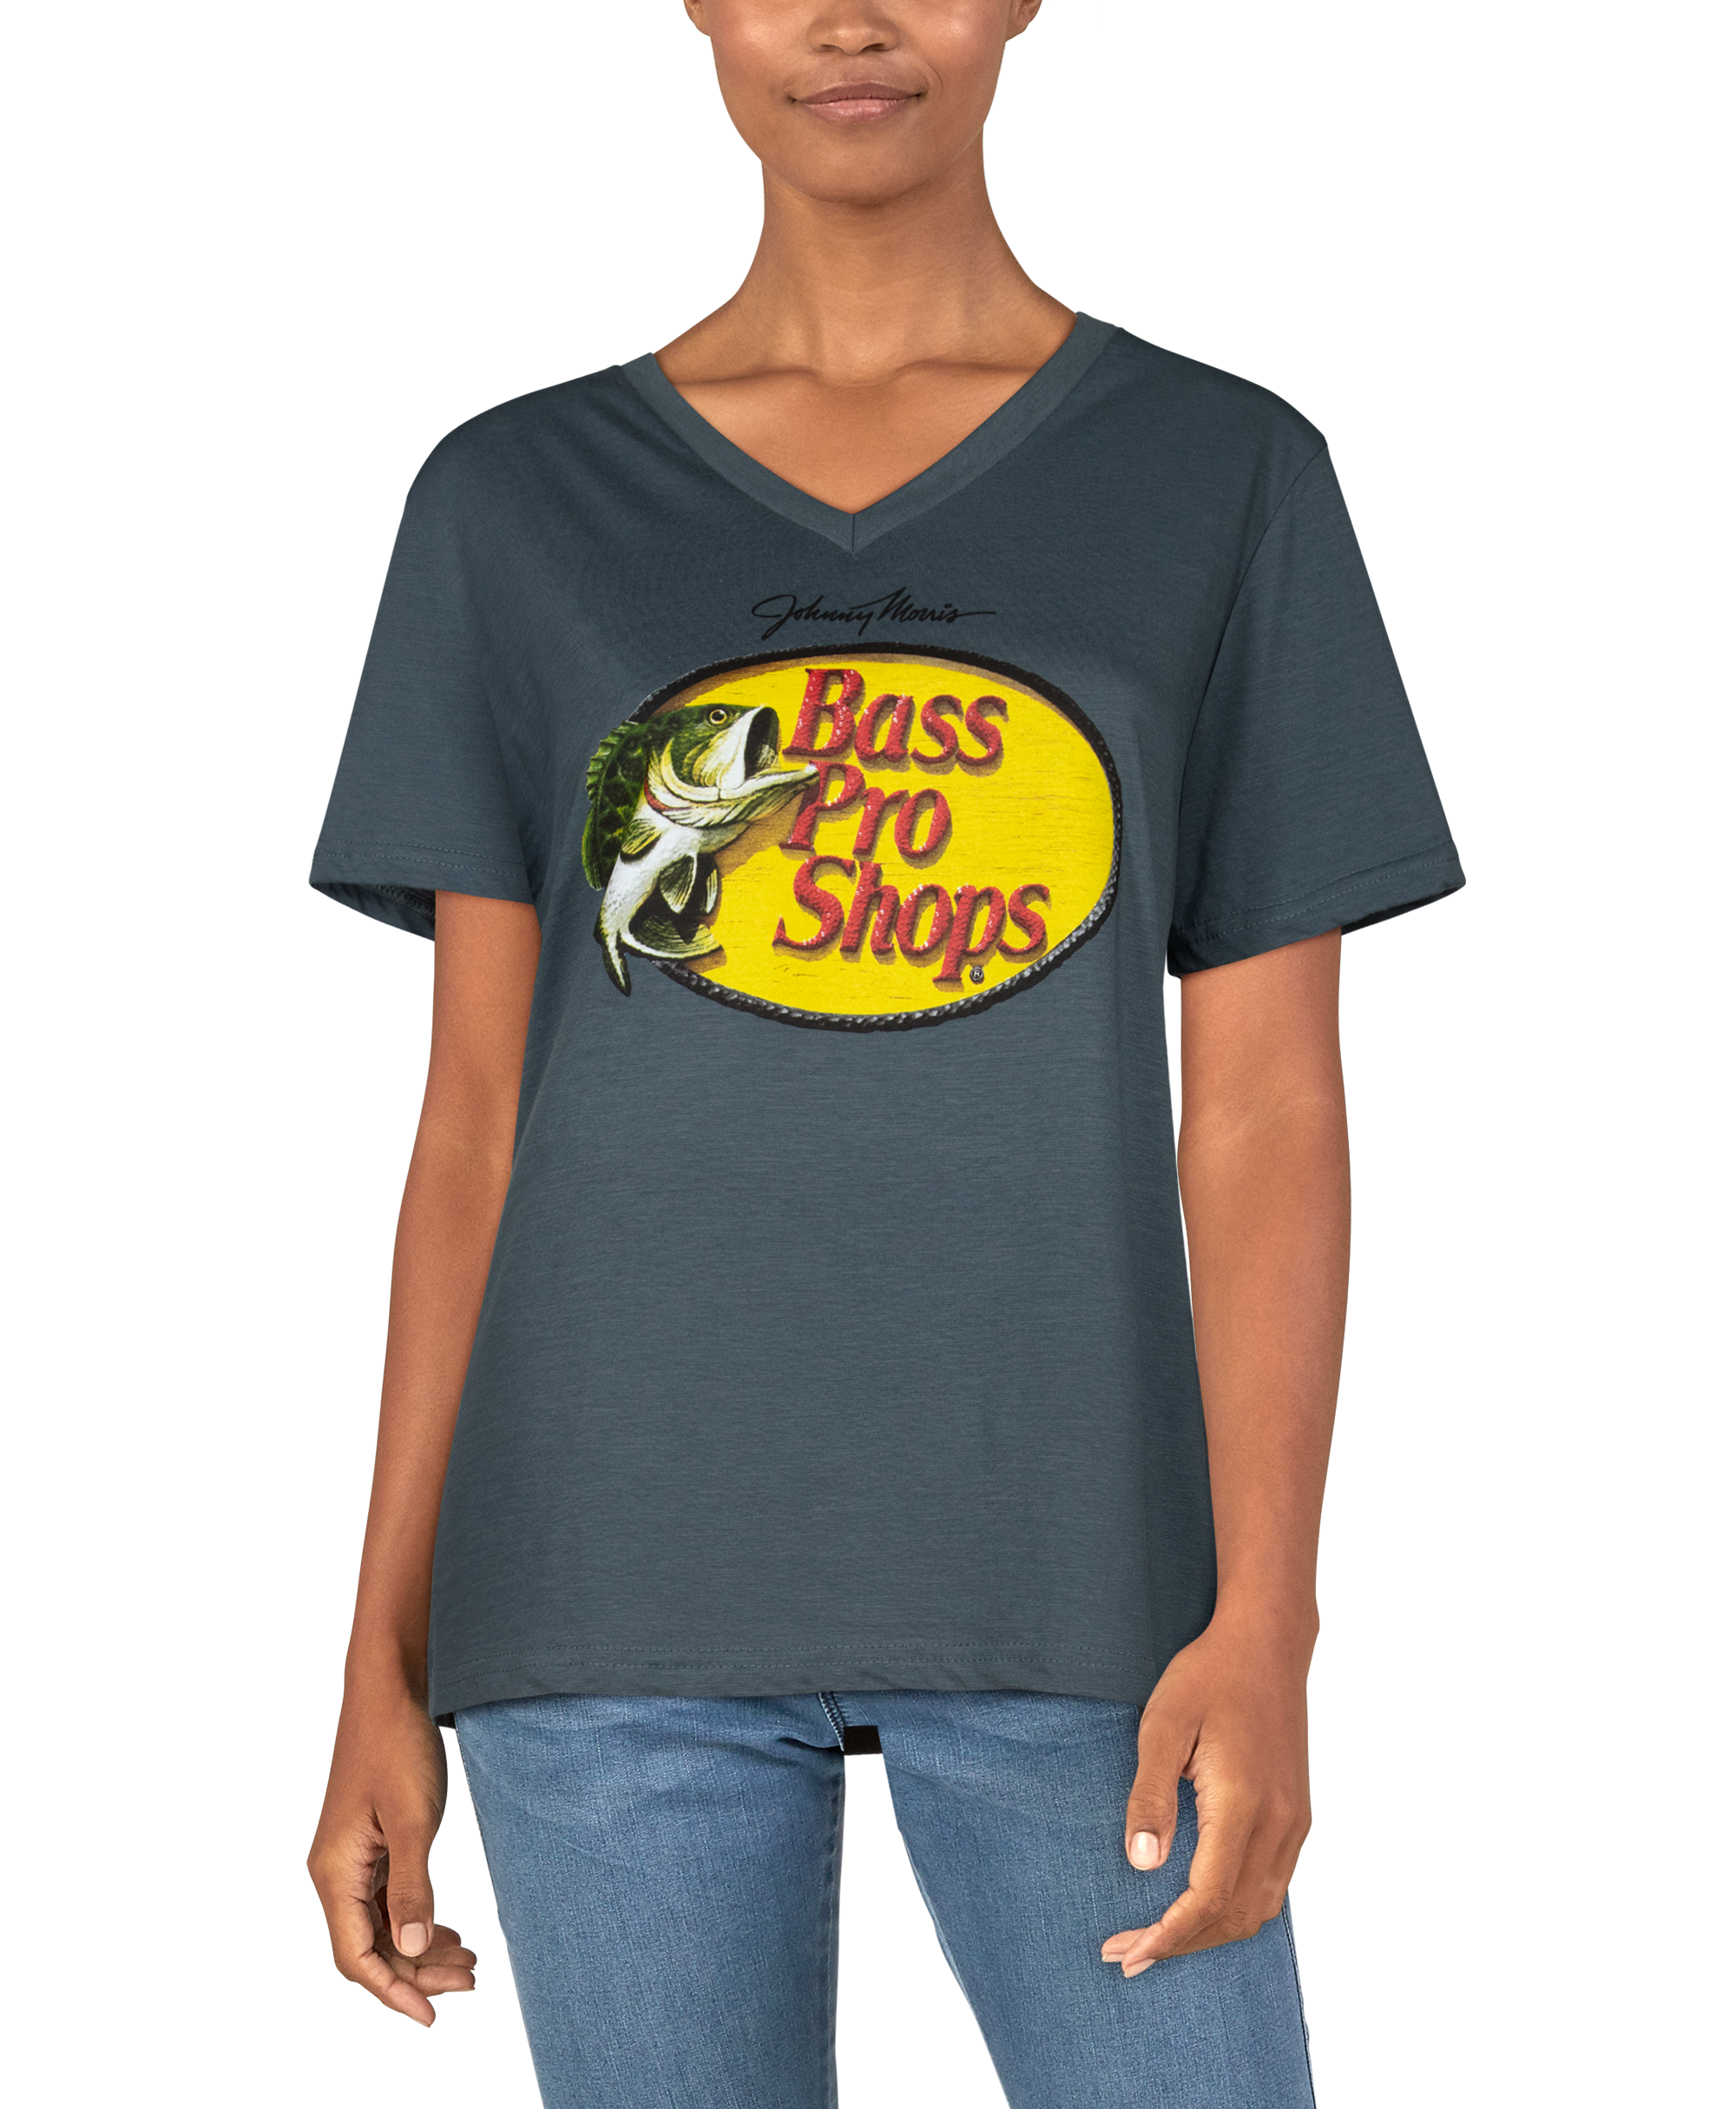 Bass Pro Shops Woodcut V-Neck Short-Sleeve T-Shirt for Ladies - Charcoal - S